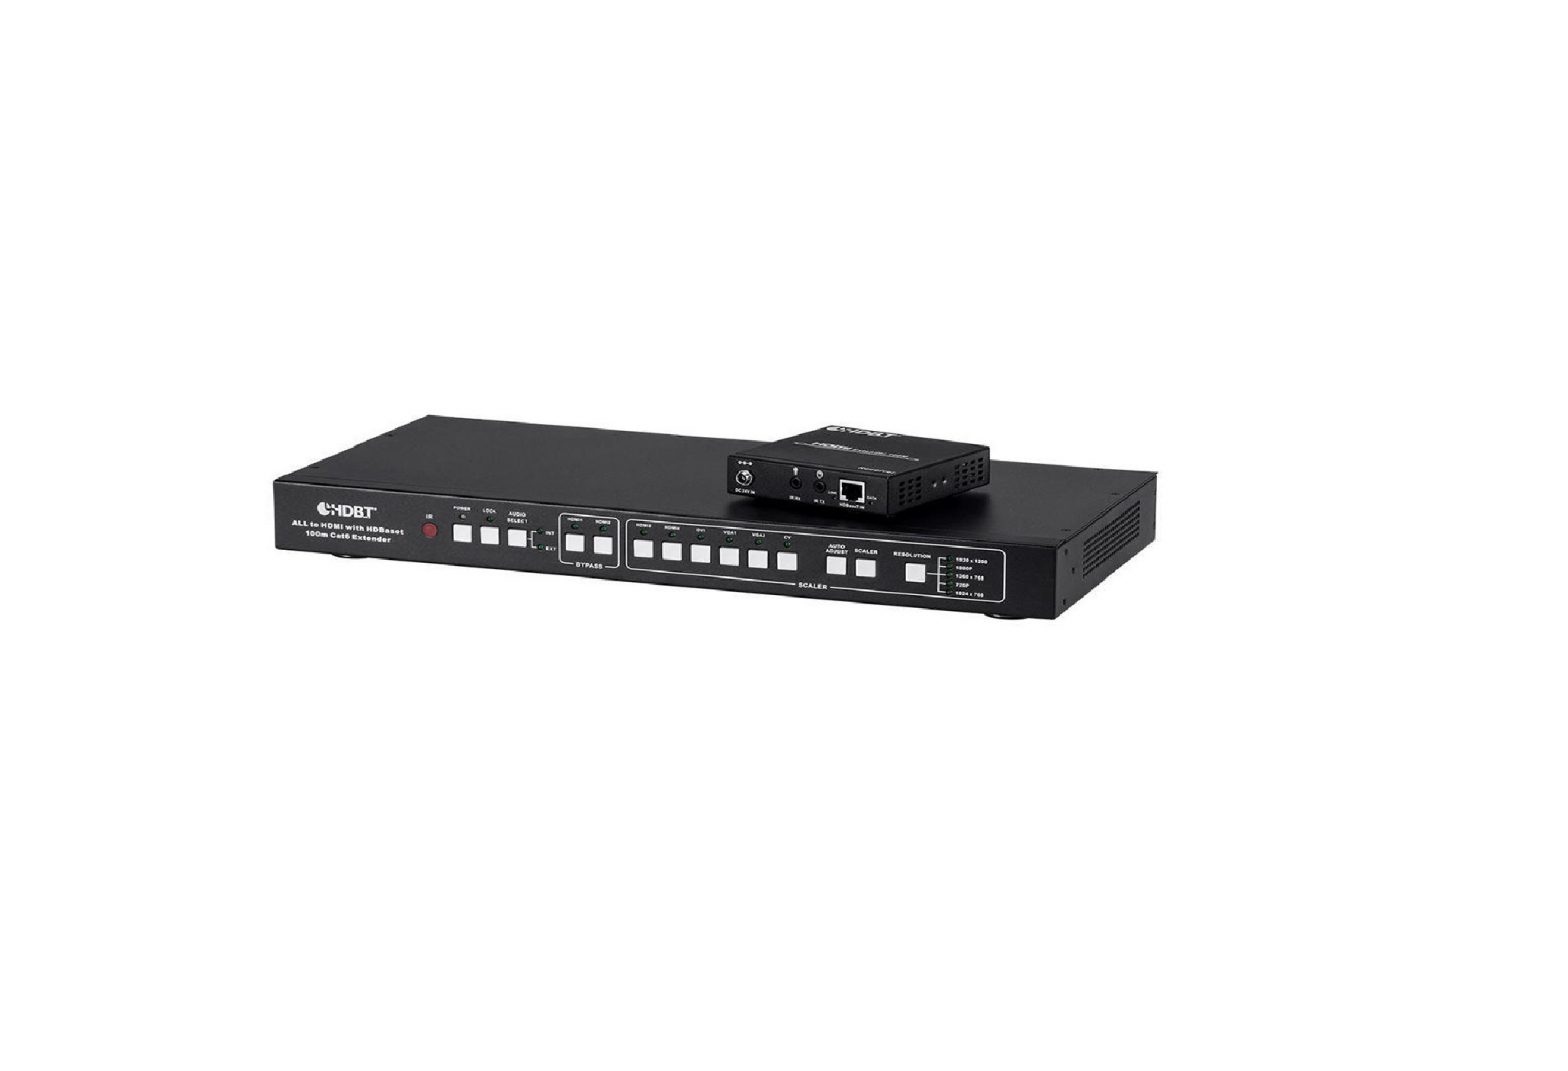 BLACK BIRD All to HDMI Converter with HDBaseT Extender User Guide